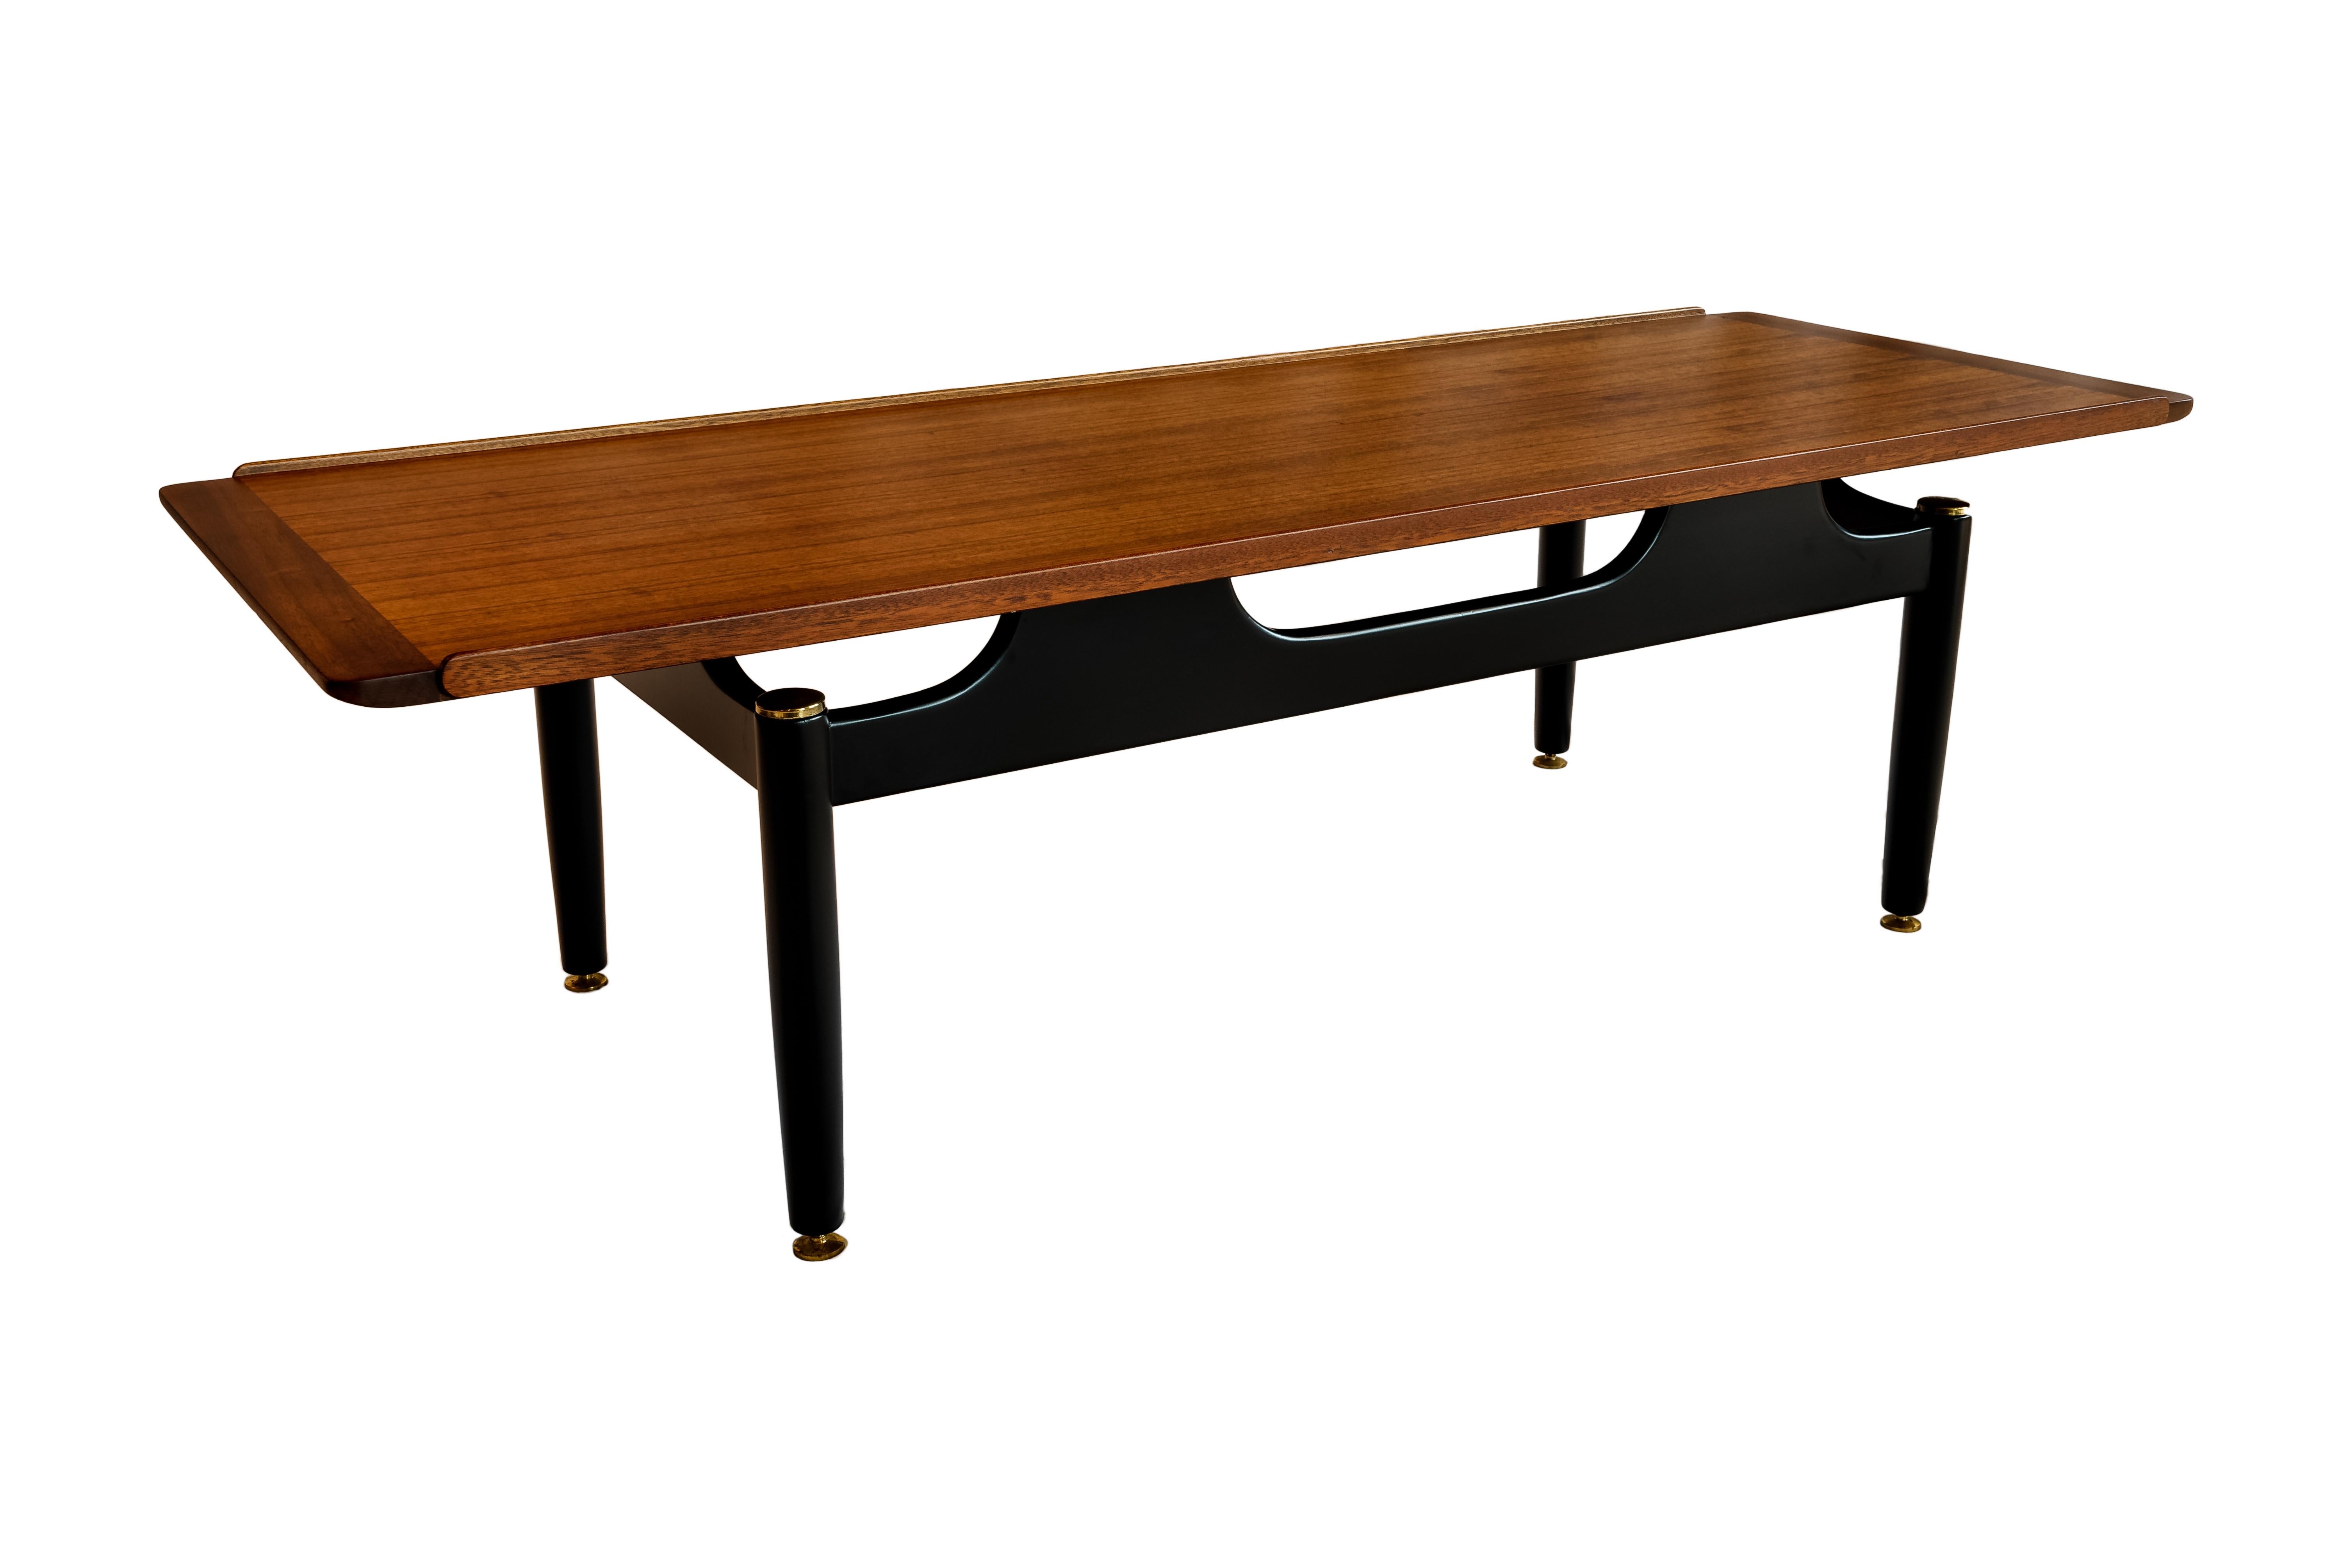 Mid-Century Modern Bubinga wood coffee table attributed to Jens Risom, circa 1959.
Elegant, sophisticated Mid-Century Modern bubinga wood coffee table attributed to Jens Risom, with Bubinga wood floating top and black lacquered turned legs with